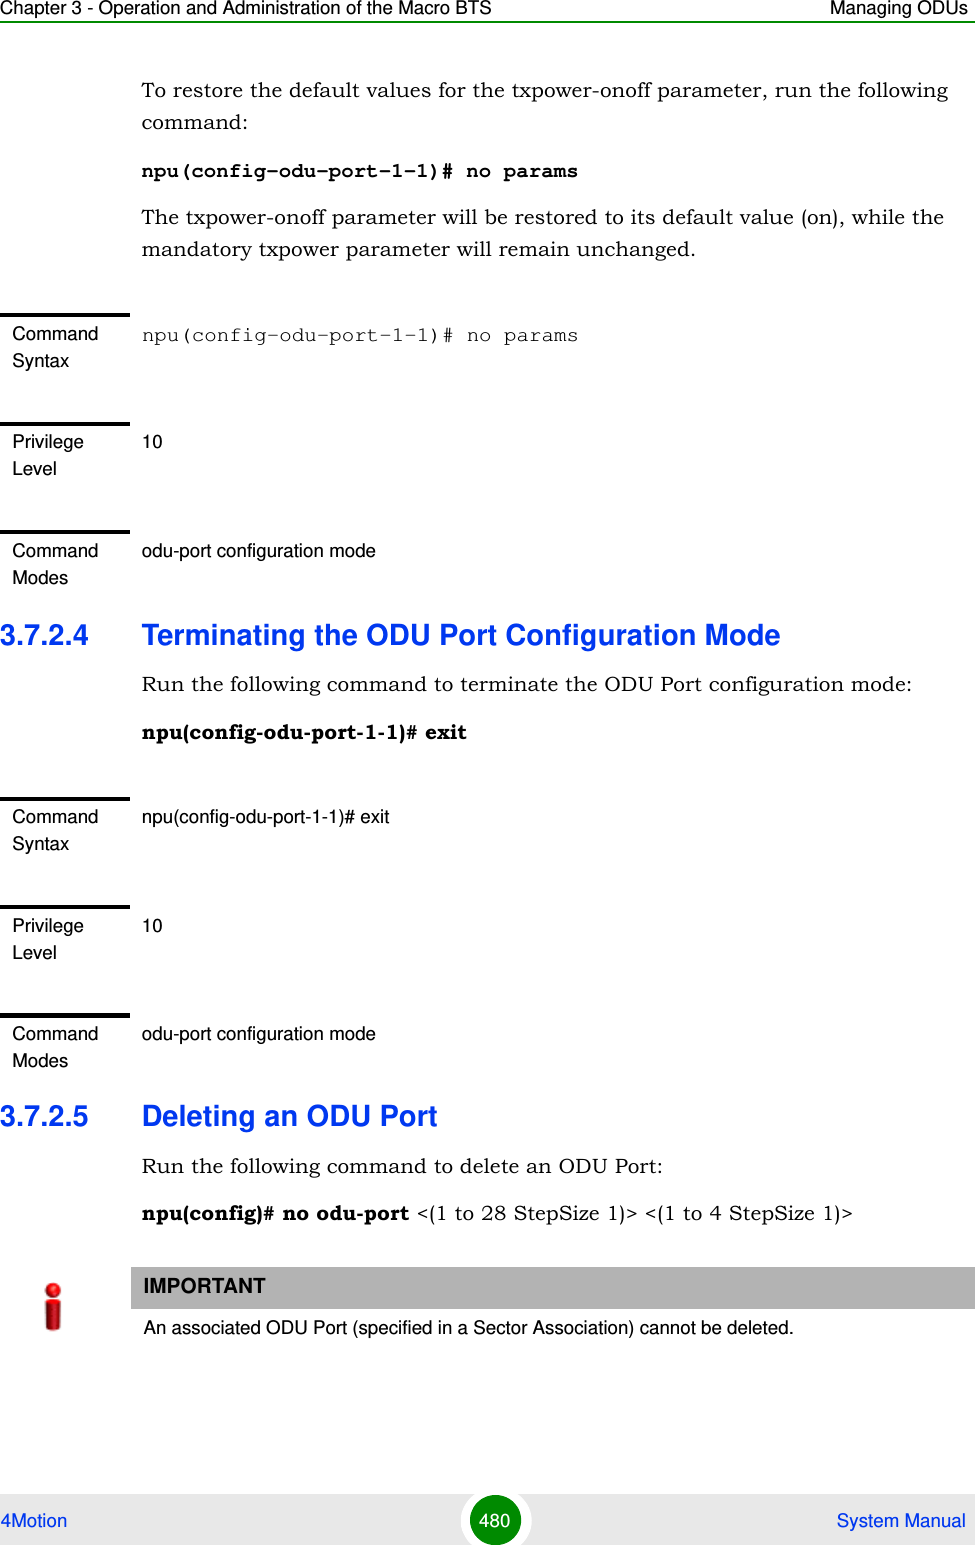 Chapter 3 - Operation and Administration of the Macro BTS Managing ODUs4Motion 480  System ManualTo restore the default values for the txpower-onoff parameter, run the following command:npu(config-odu-port-1-1)# no paramsThe txpower-onoff parameter will be restored to its default value (on), while the mandatory txpower parameter will remain unchanged.3.7.2.4 Terminating the ODU Port Configuration ModeRun the following command to terminate the ODU Port configuration mode:npu(config-odu-port-1-1)# exit3.7.2.5 Deleting an ODU PortRun the following command to delete an ODU Port:npu(config)# no odu-port &lt;(1 to 28 StepSize 1)&gt; &lt;(1 to 4 StepSize 1)&gt;Command Syntaxnpu(config-odu-port-1-1)# no paramsPrivilege Level10Command Modesodu-port configuration modeCommand Syntaxnpu(config-odu-port-1-1)# exitPrivilege Level10Command Modesodu-port configuration modeIMPORTANTAn associated ODU Port (specified in a Sector Association) cannot be deleted.